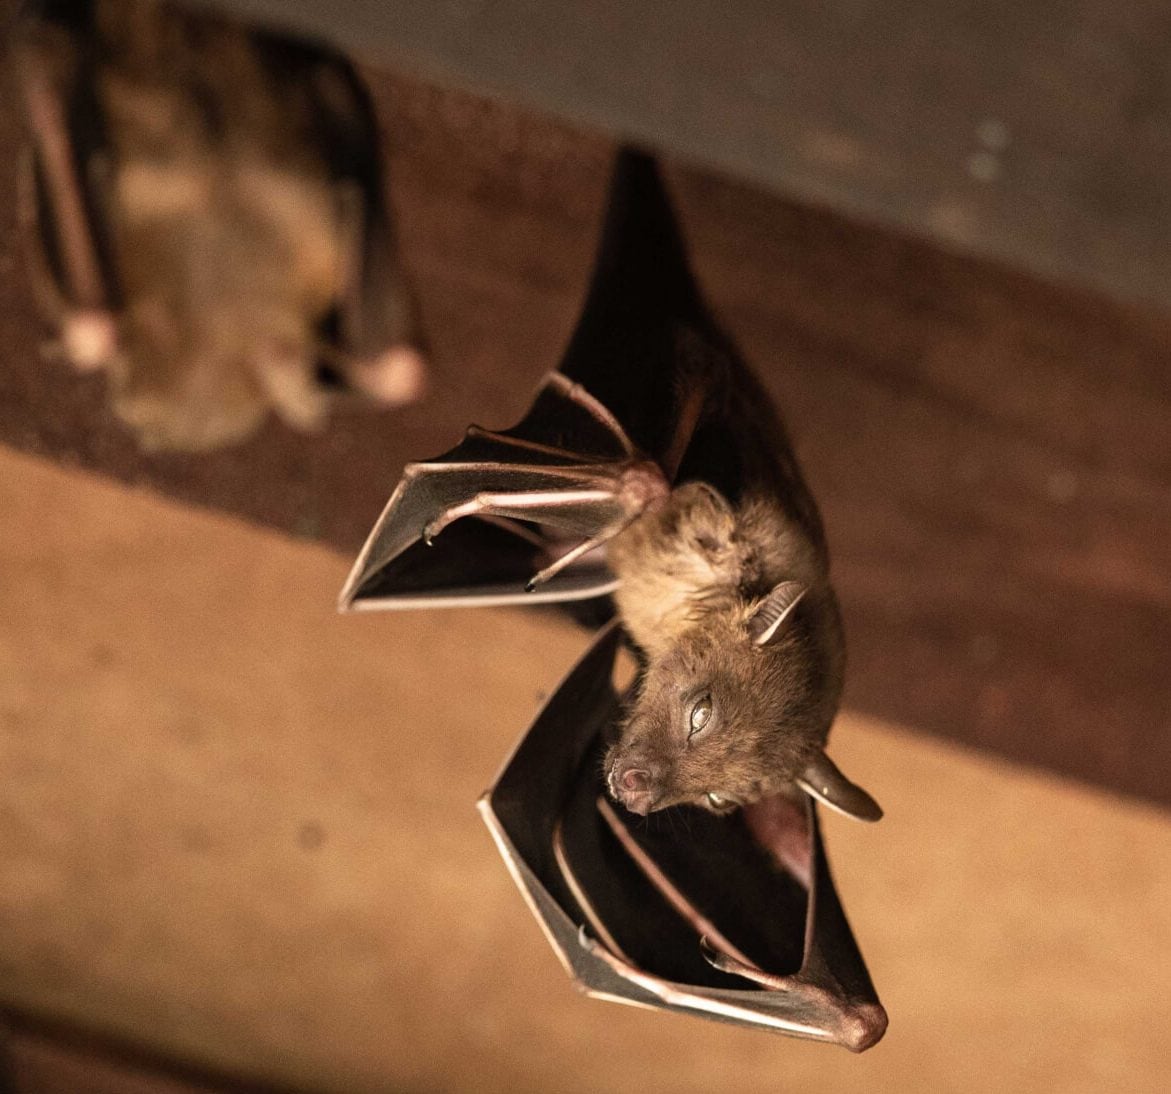 Expert bat removal services for a safe and humane solution in Sacramento